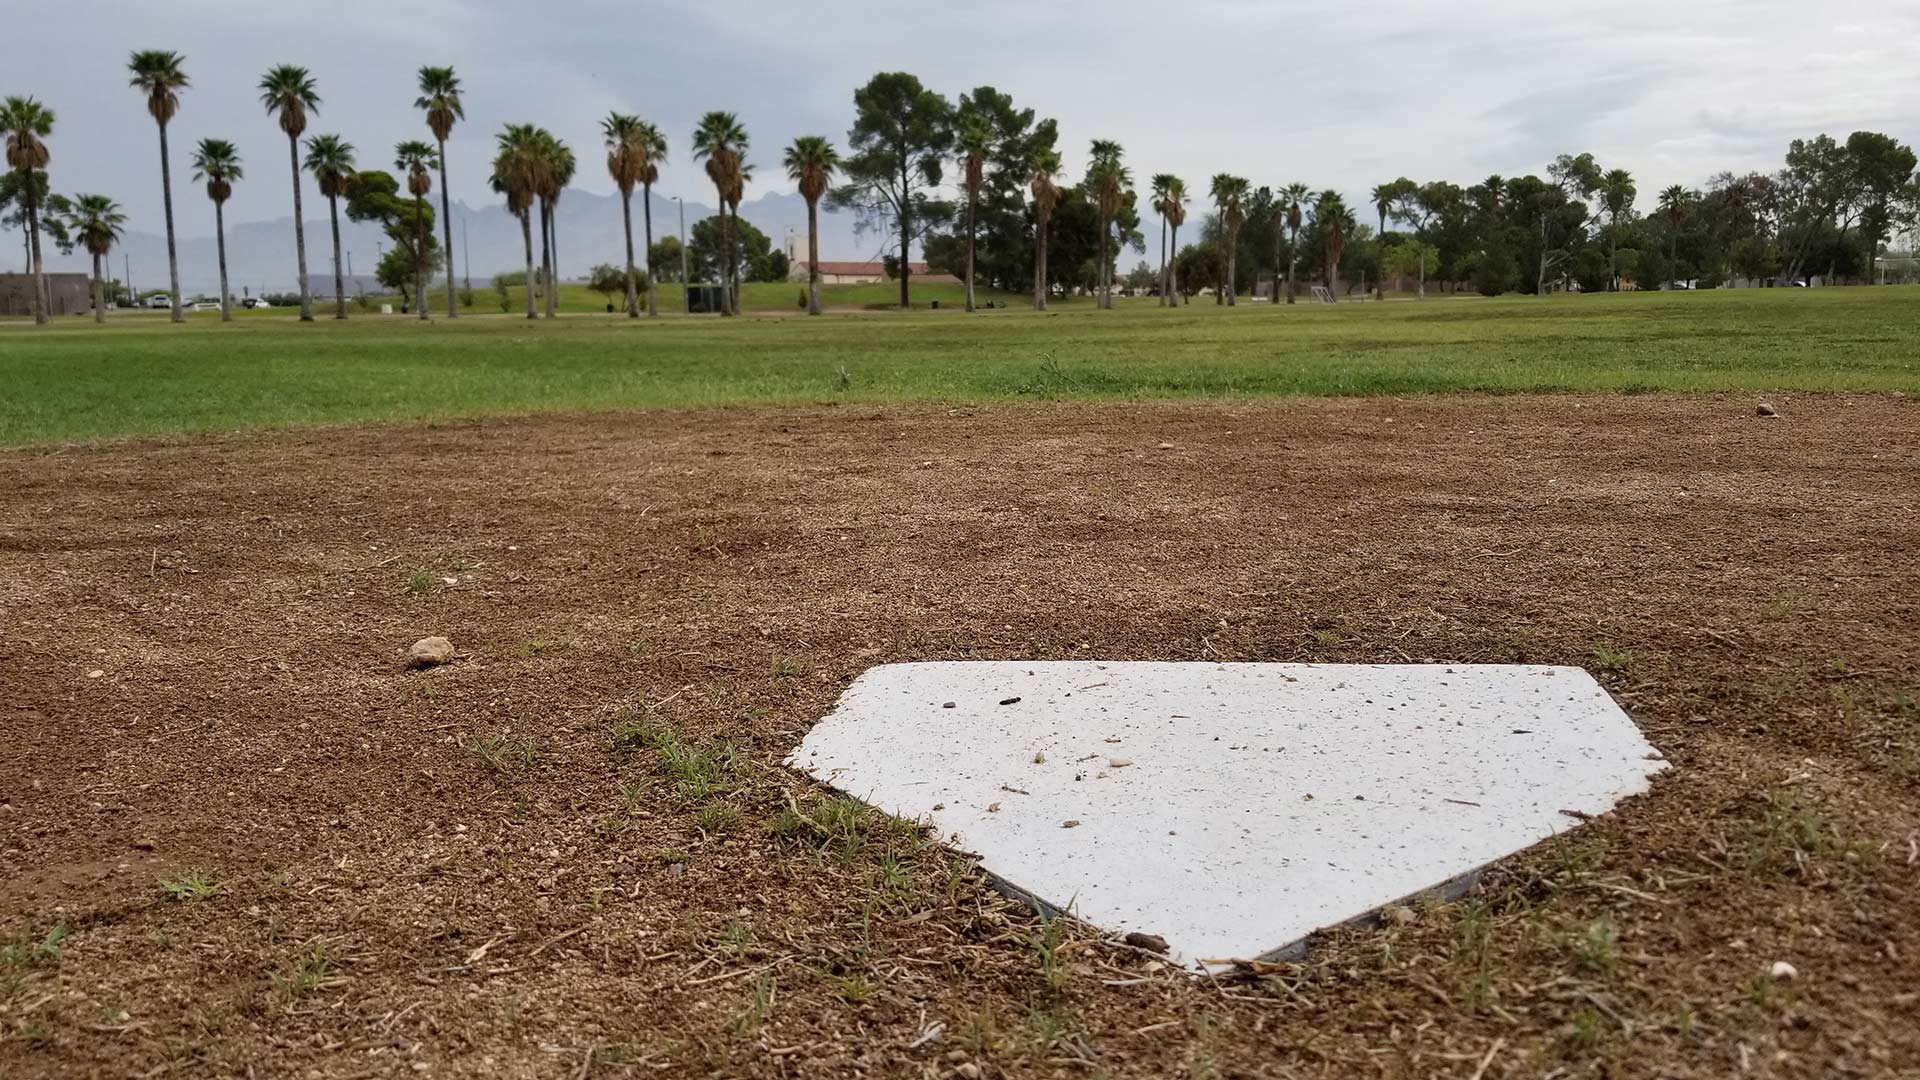 Behind home plate on a little league baseball field at Himmel Park. From July 2018.